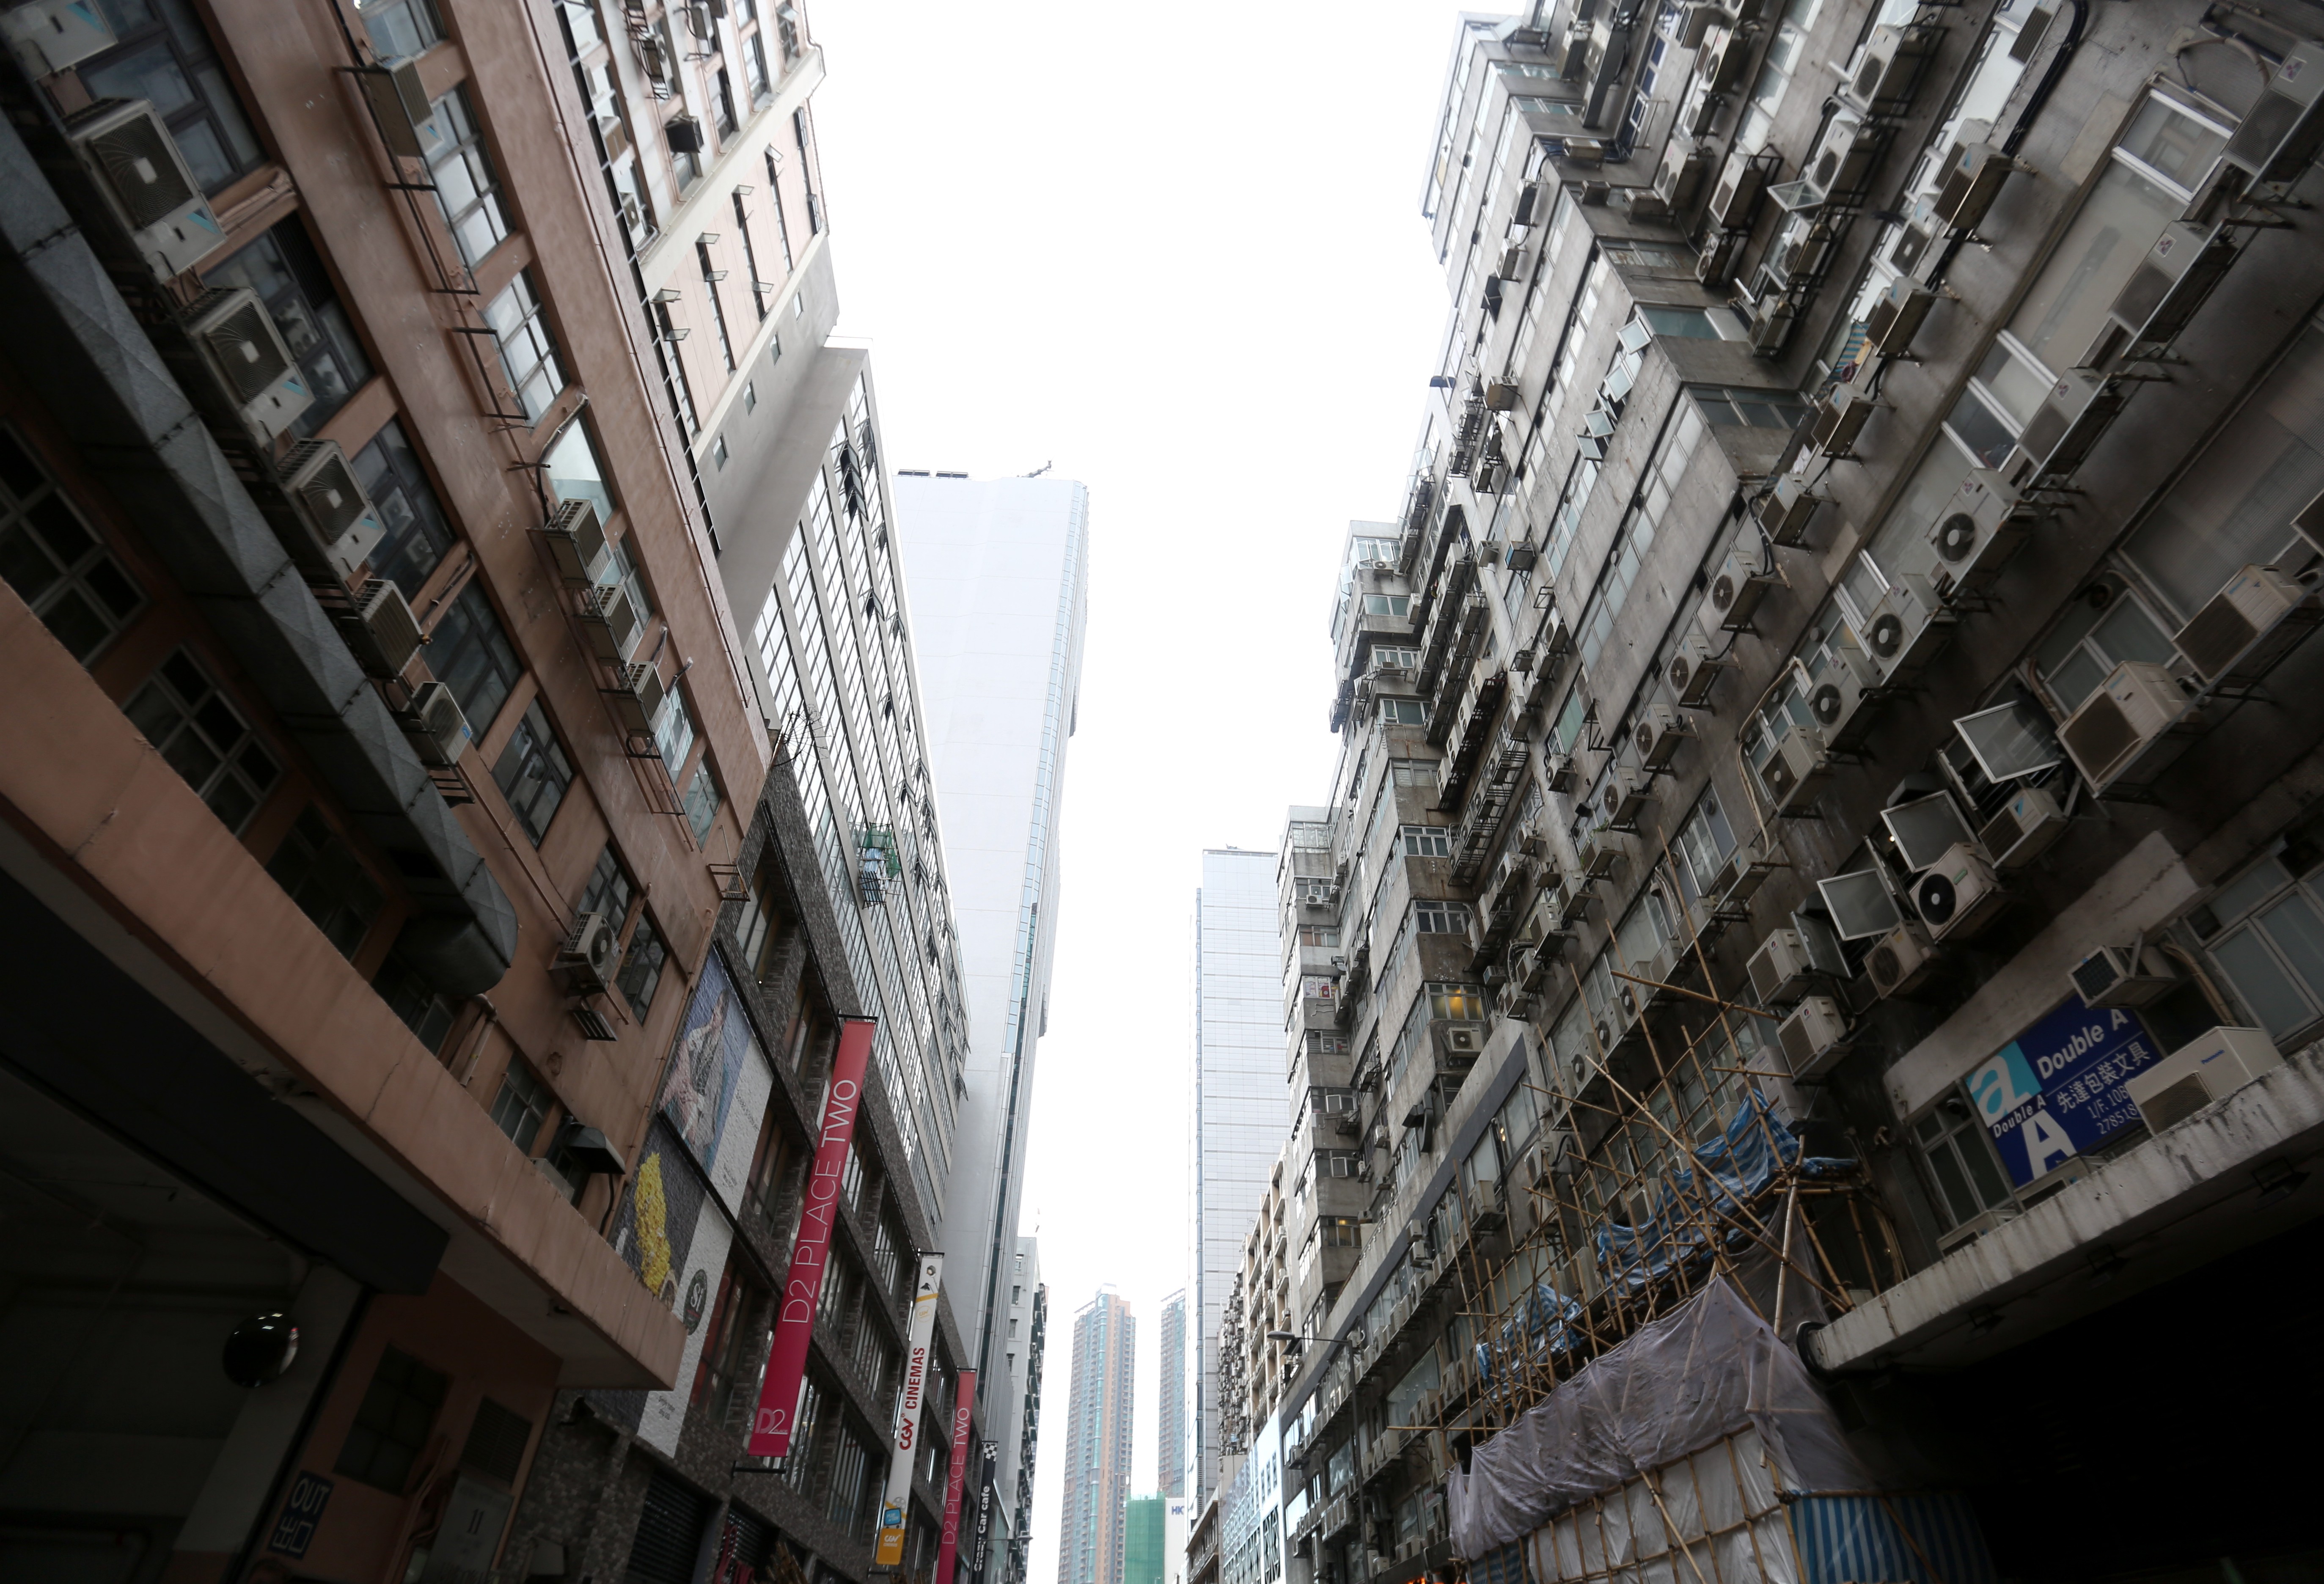 The scheme aims to push owners of industrial buildings to turn them into temporary social housing. Photo: Xiaomei Chen